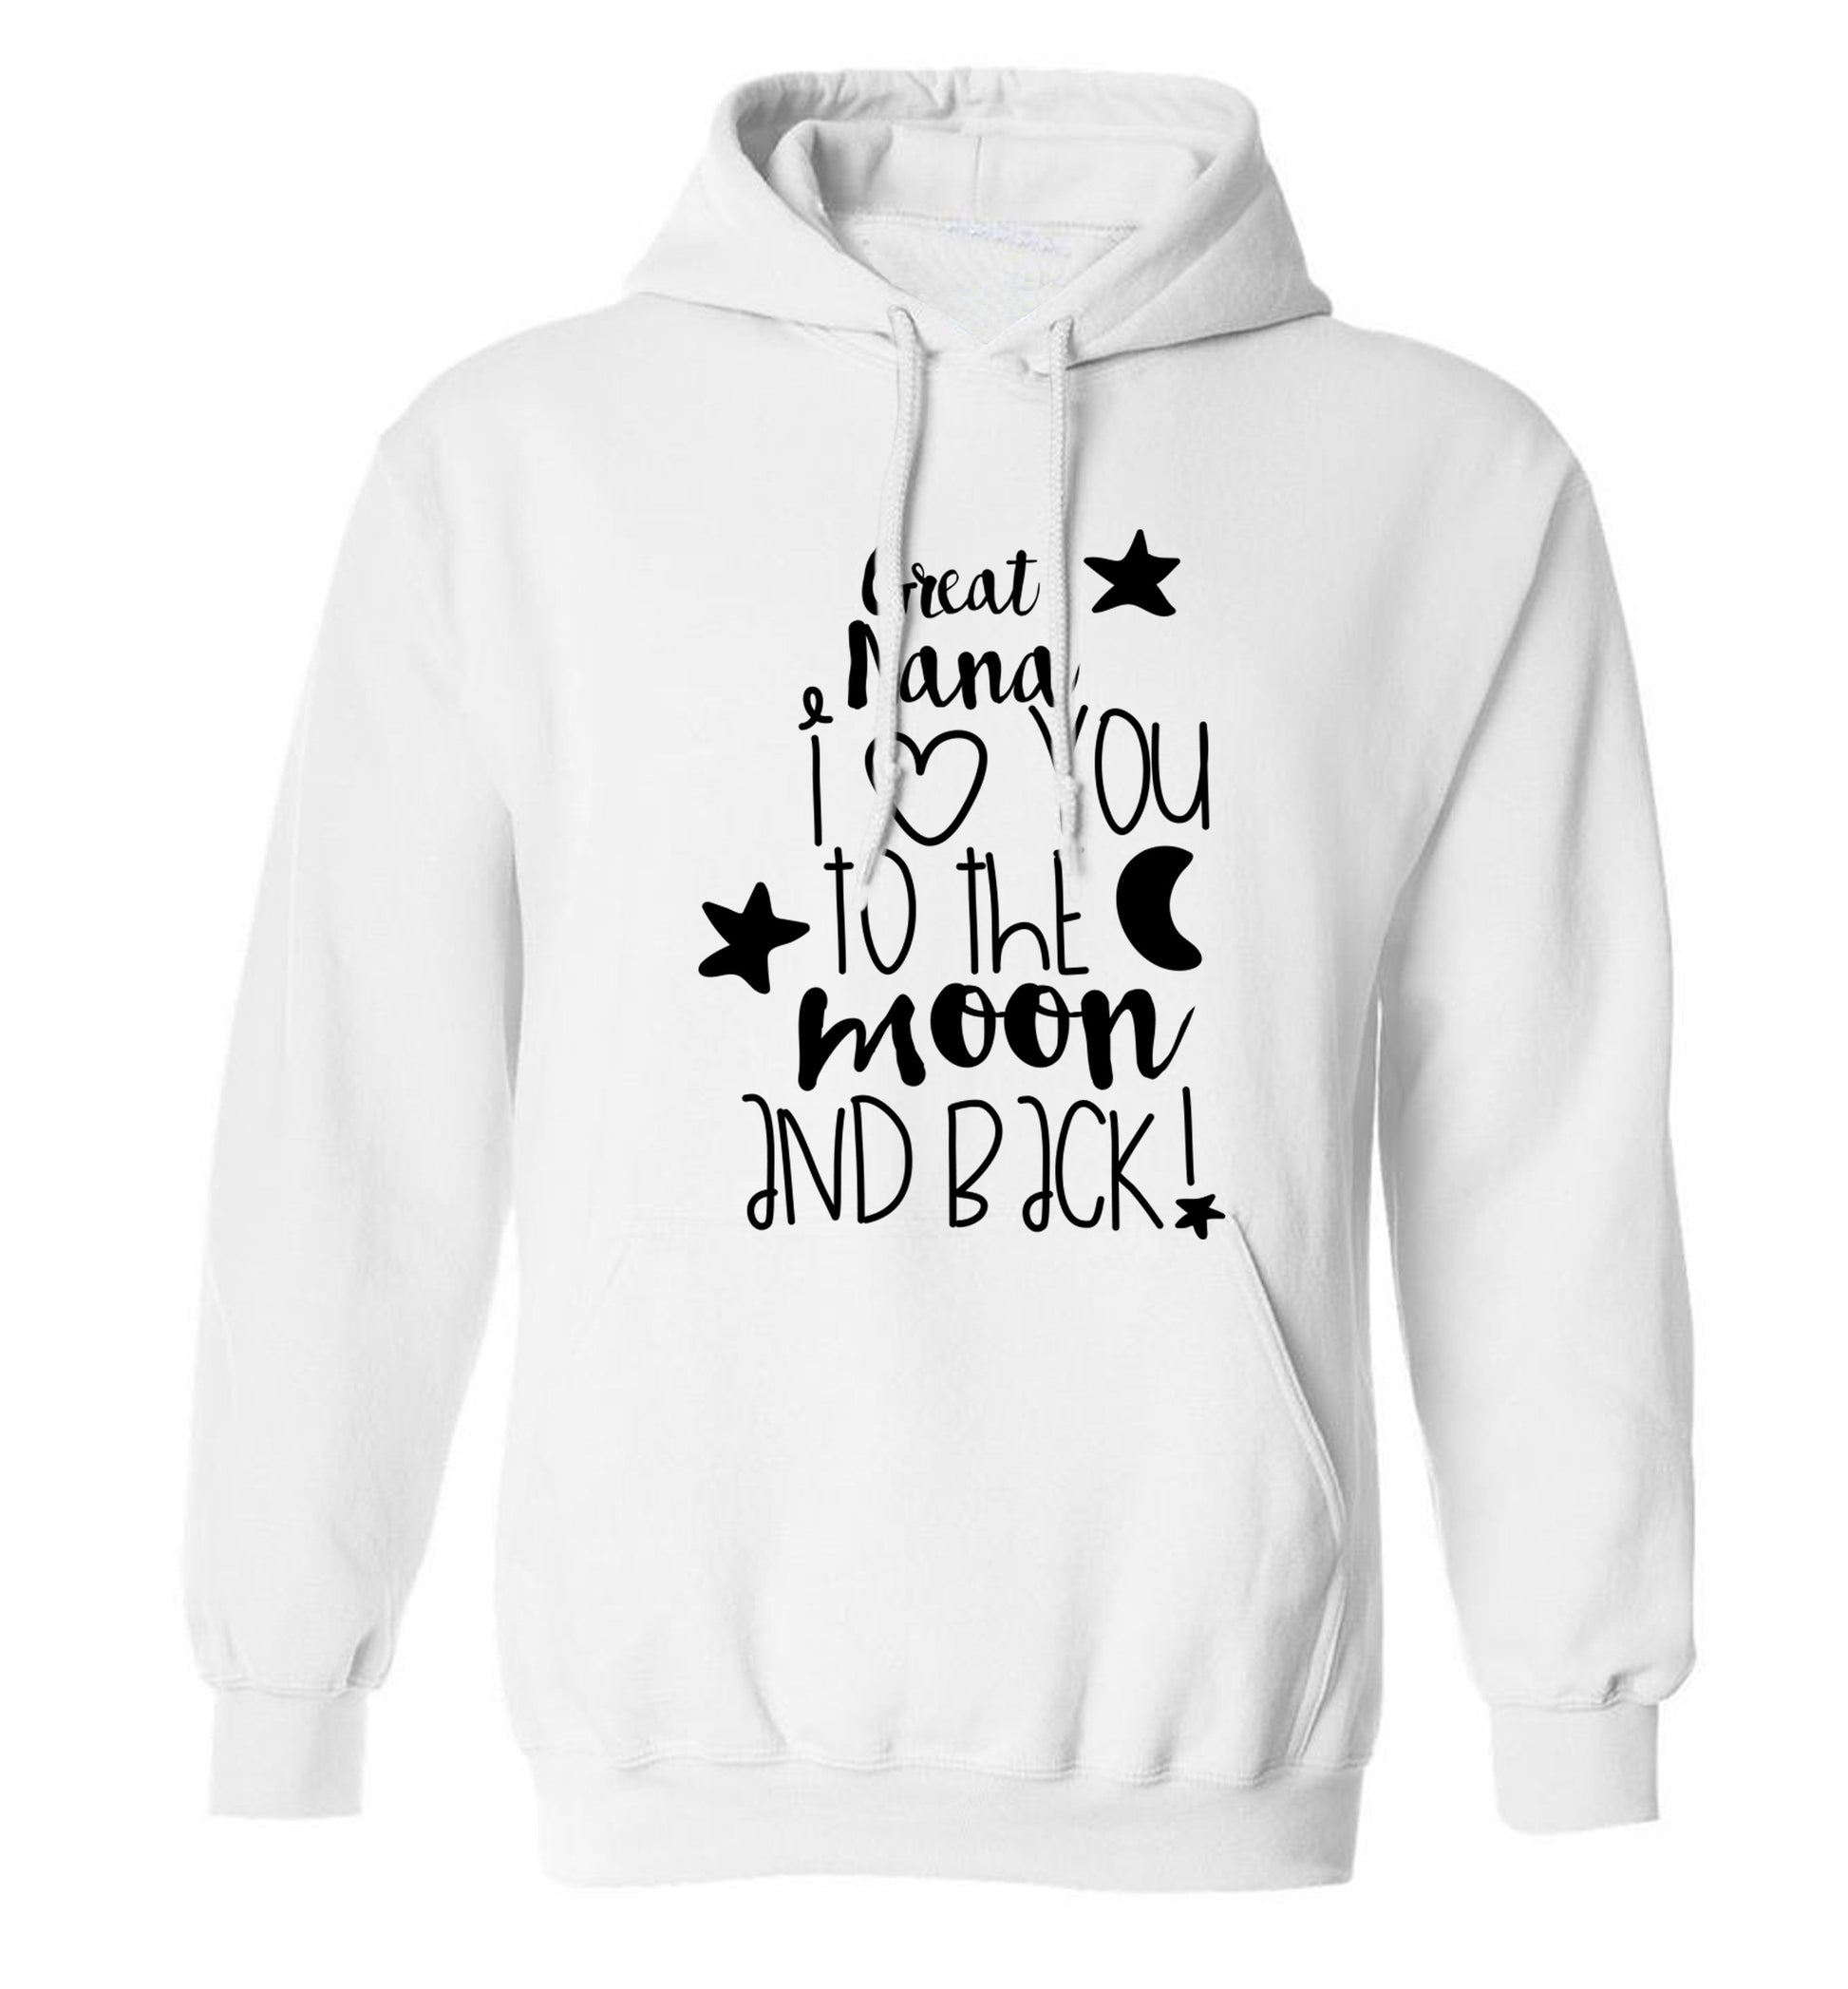 Great Nana I love you to the moon and back adults unisex white hoodie 2XL